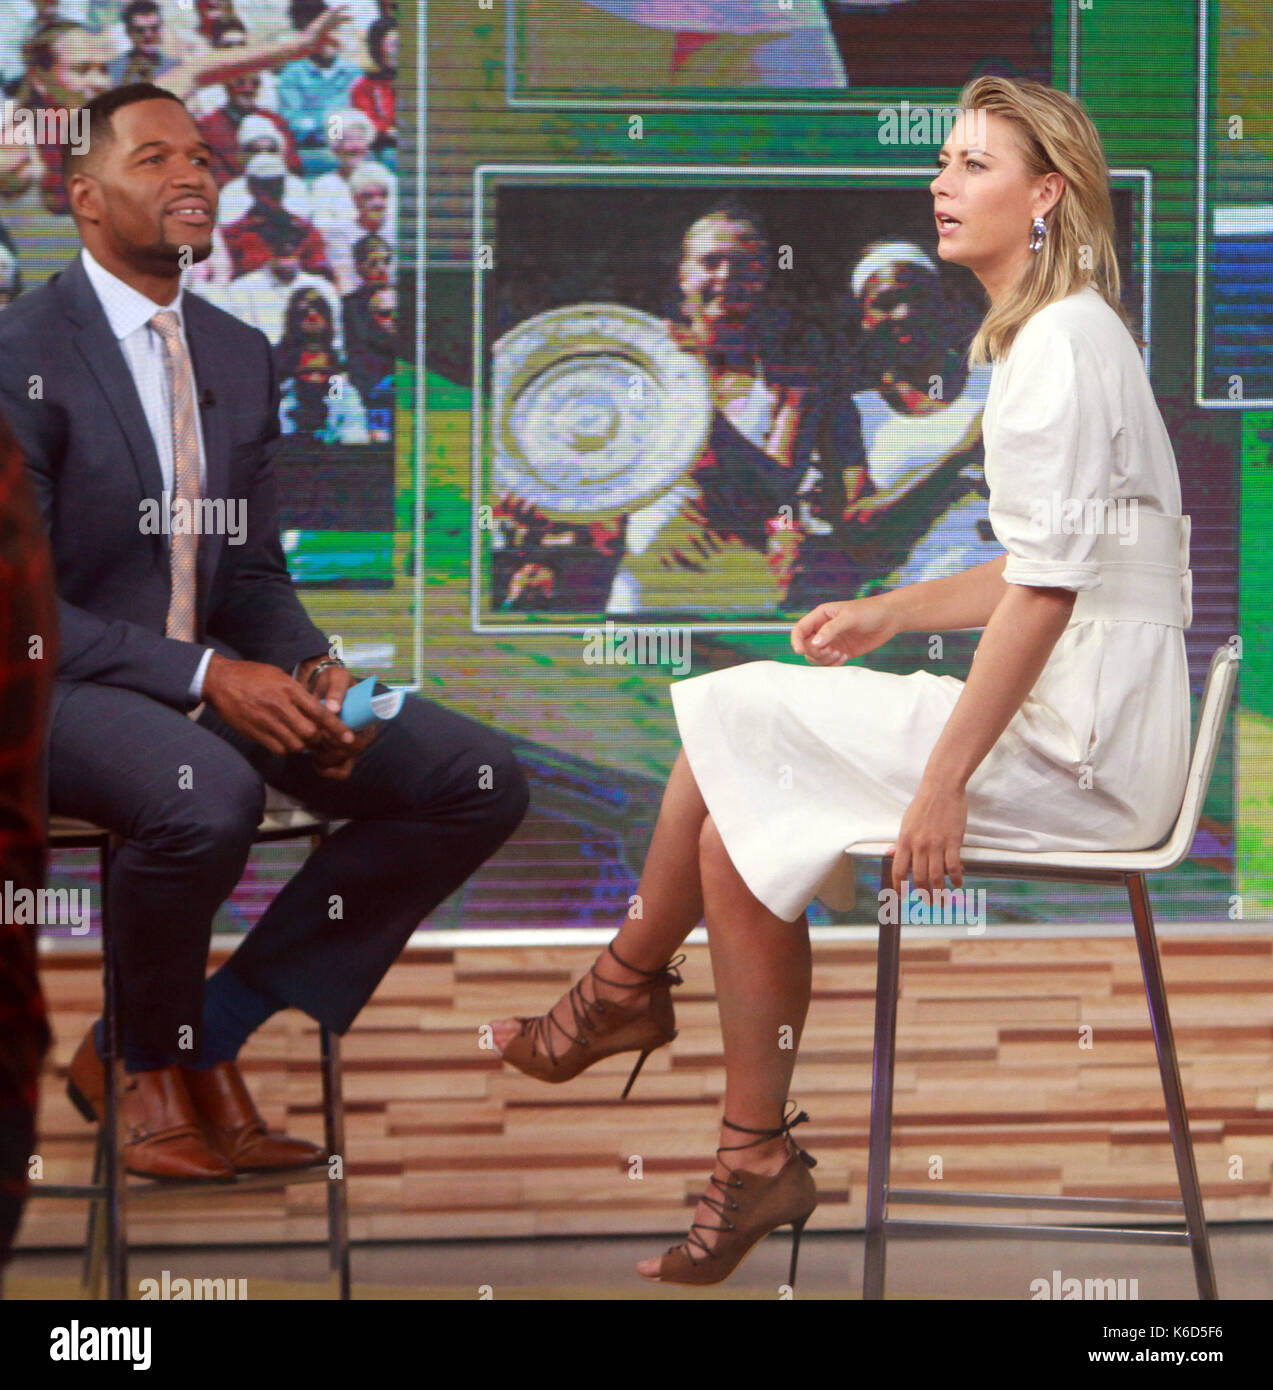 New York, USA. 12th Sep, 2017. Maria Sharapova at Good Morning America promoting her new book Unstoppable: My Life So Far on September 12, 2017 in New York City. Credit: MediaPunch Inc/Alamy Live News Stock Photo